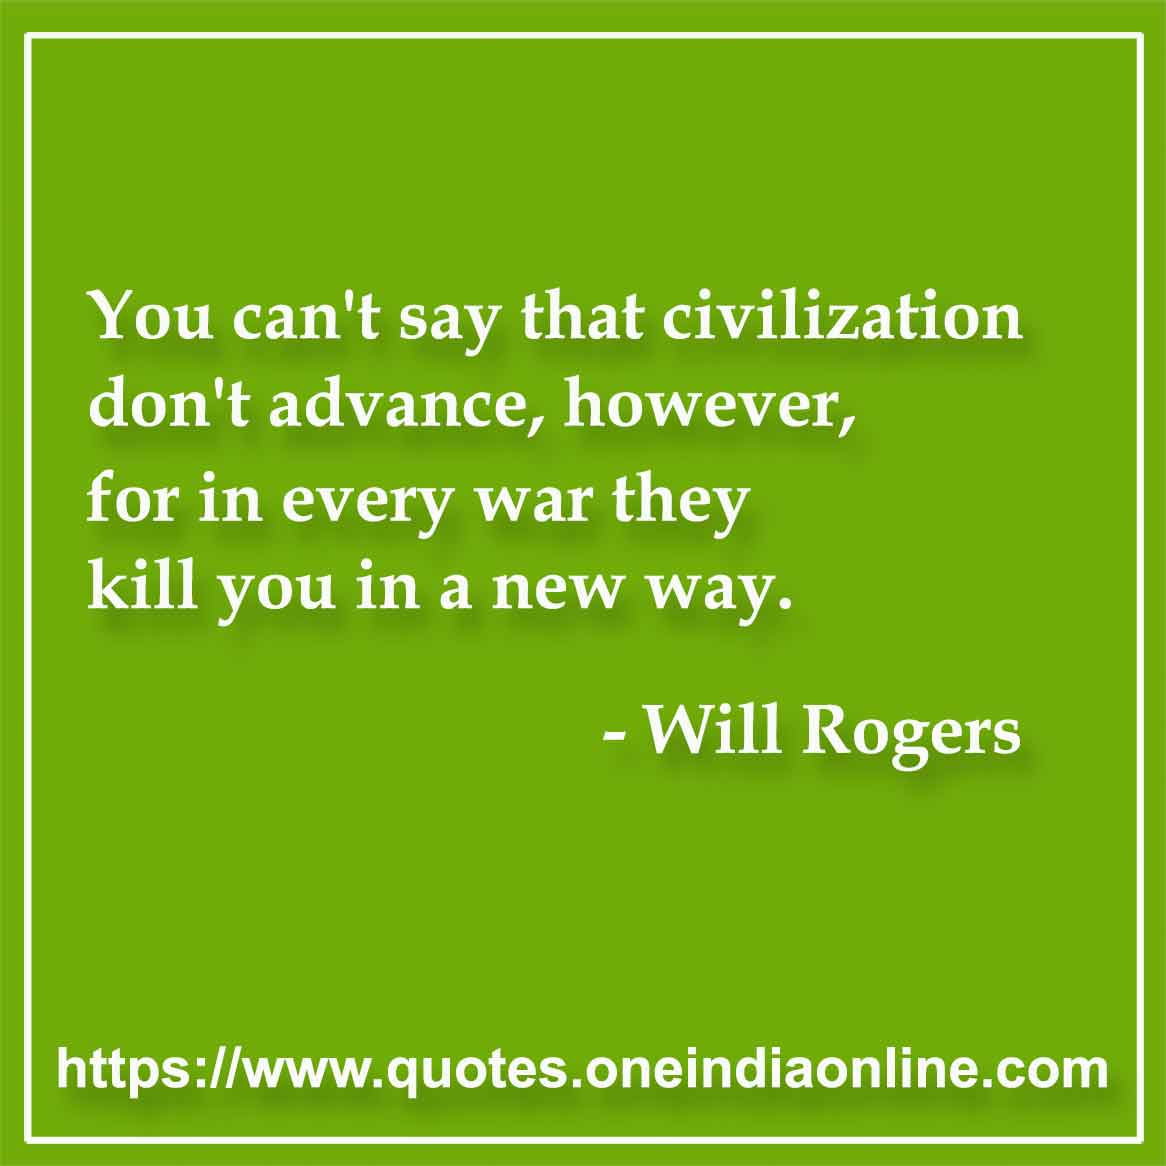 You can't say that civilization don't advance, however, for in every war they kill you in a new way.

- Will Rogers Quotes